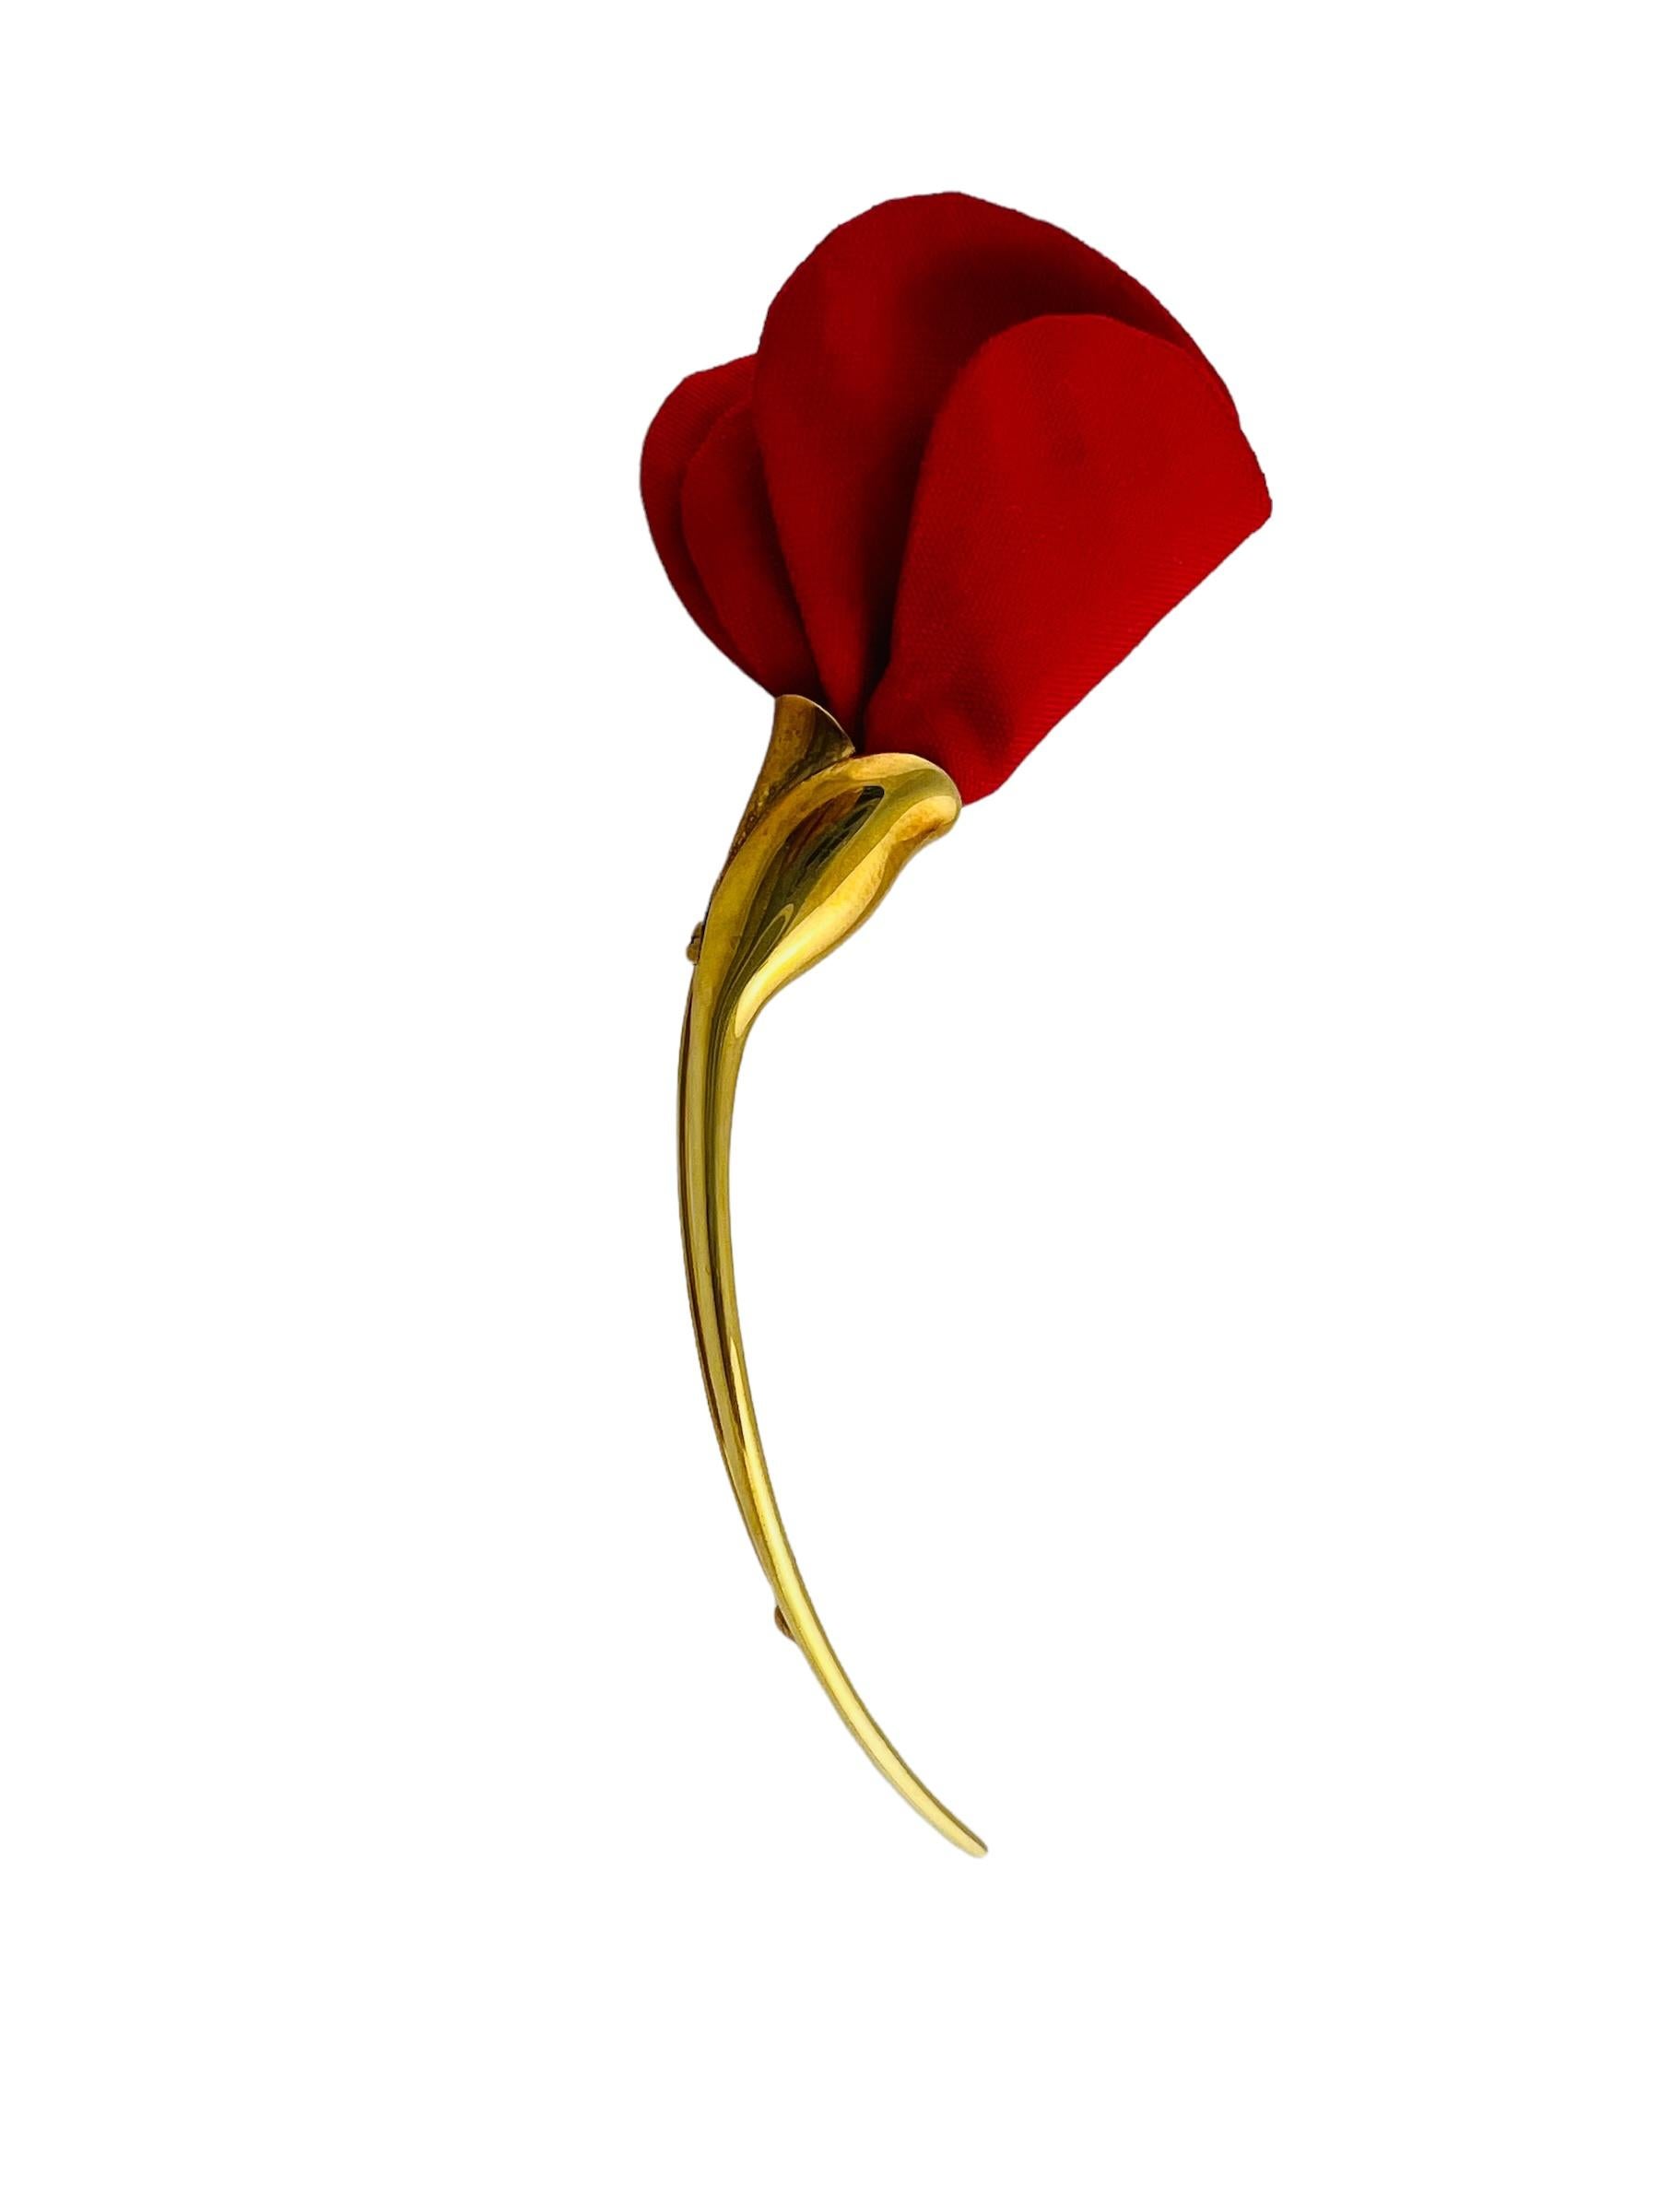 Tiffany & Co. Elsa Peretti 18K Yellow Gold Amapola Poppy Brooch

This lovely Tiffany brooch was inspired by the Spanish poppy flower on an elongated stem.

Poppy flower is red silk. Stem is set in 18K yellow gold

Stamped Tiffany & Co. Elsa Peretti